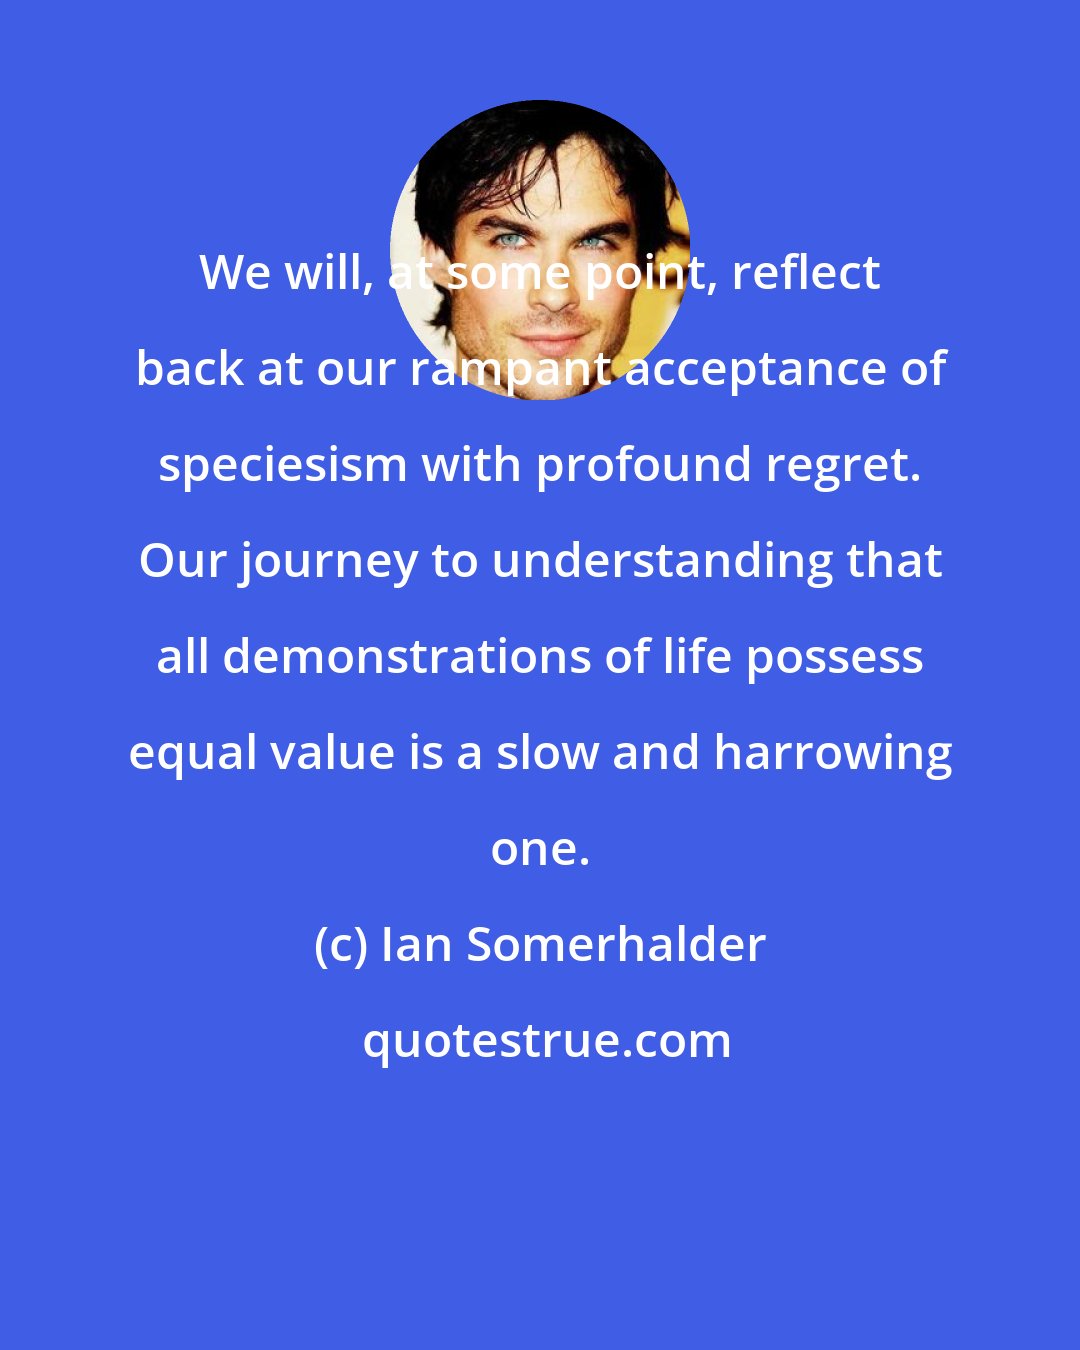 Ian Somerhalder: We will, at some point, reflect back at our rampant acceptance of speciesism with profound regret. Our journey to understanding that all demonstrations of life possess equal value is a slow and harrowing one.